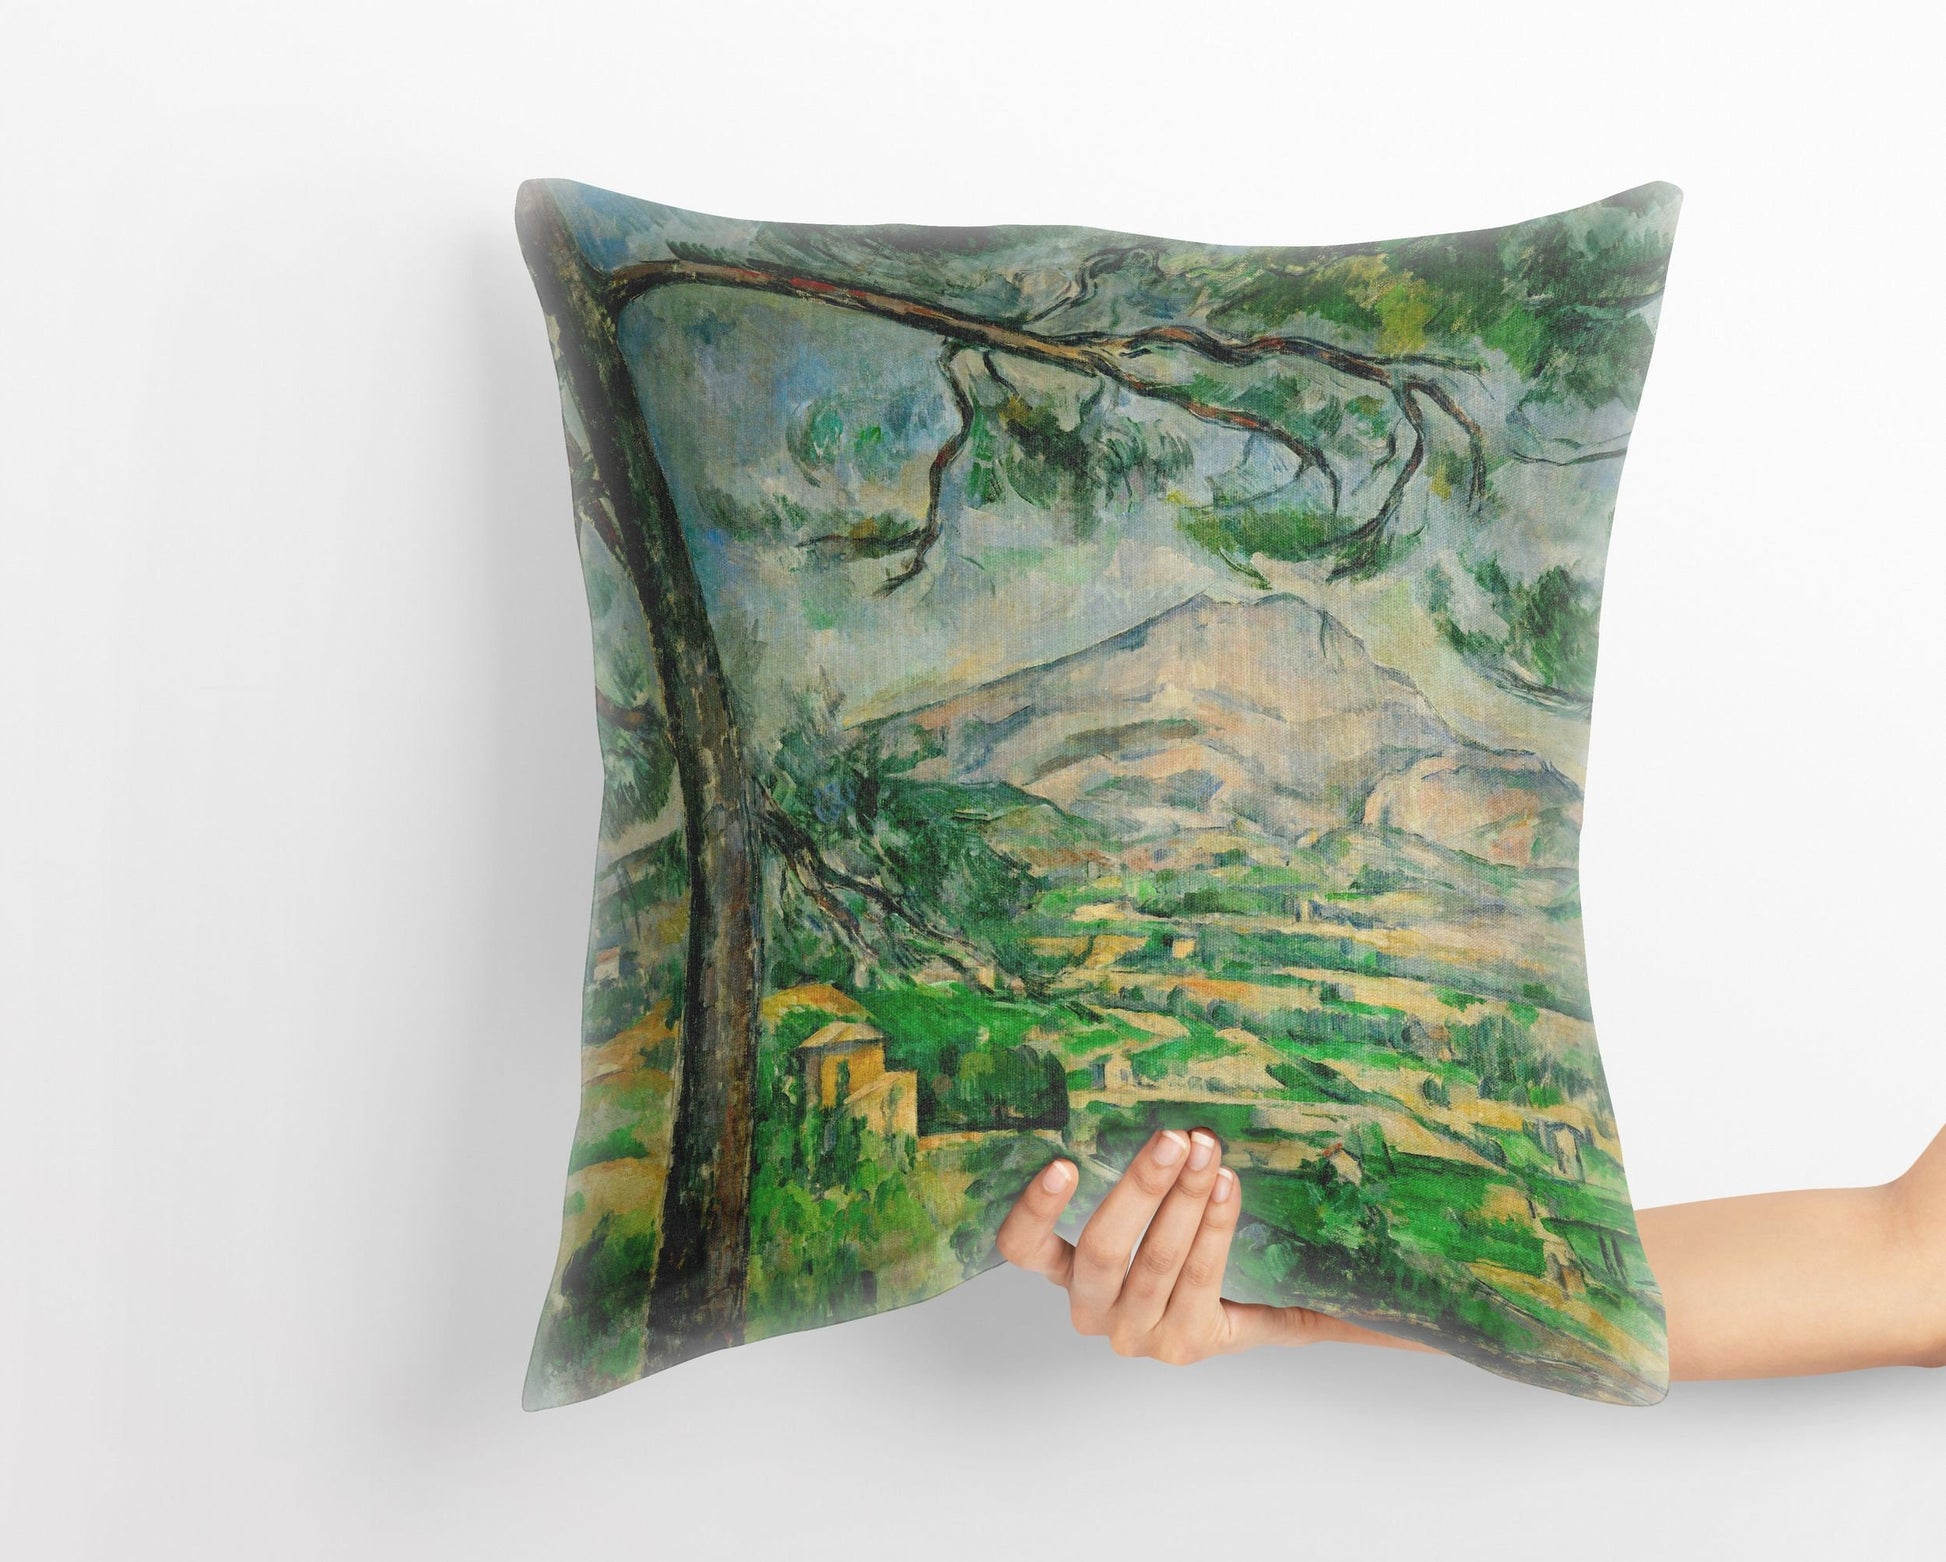 Paul Cezanne Famous Art, Toss Pillow, Abstract Throw Pillow Cover, Green Pillow Cases, Post-Impressionist Art, Large Pillow Cases